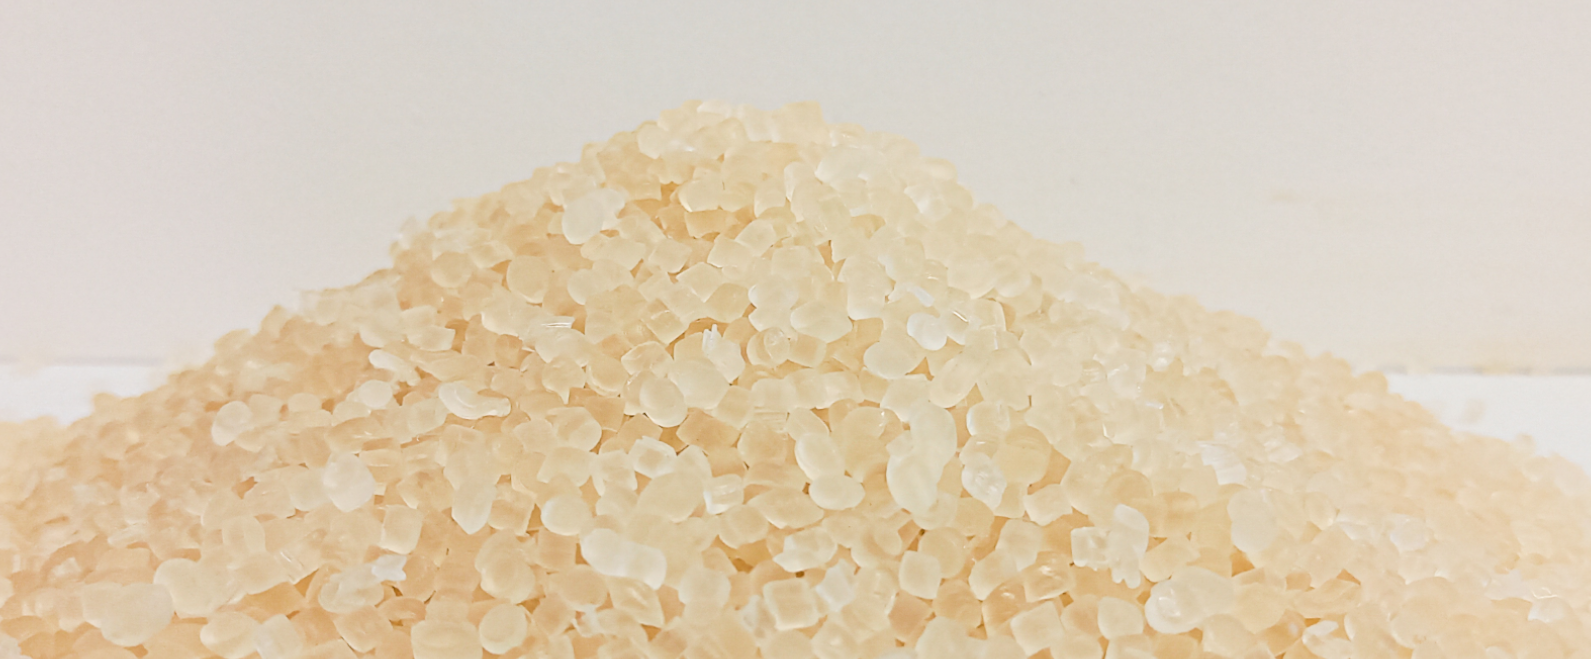 Grupa Azoty S.A. develops thermoplastic starch-based technologies 